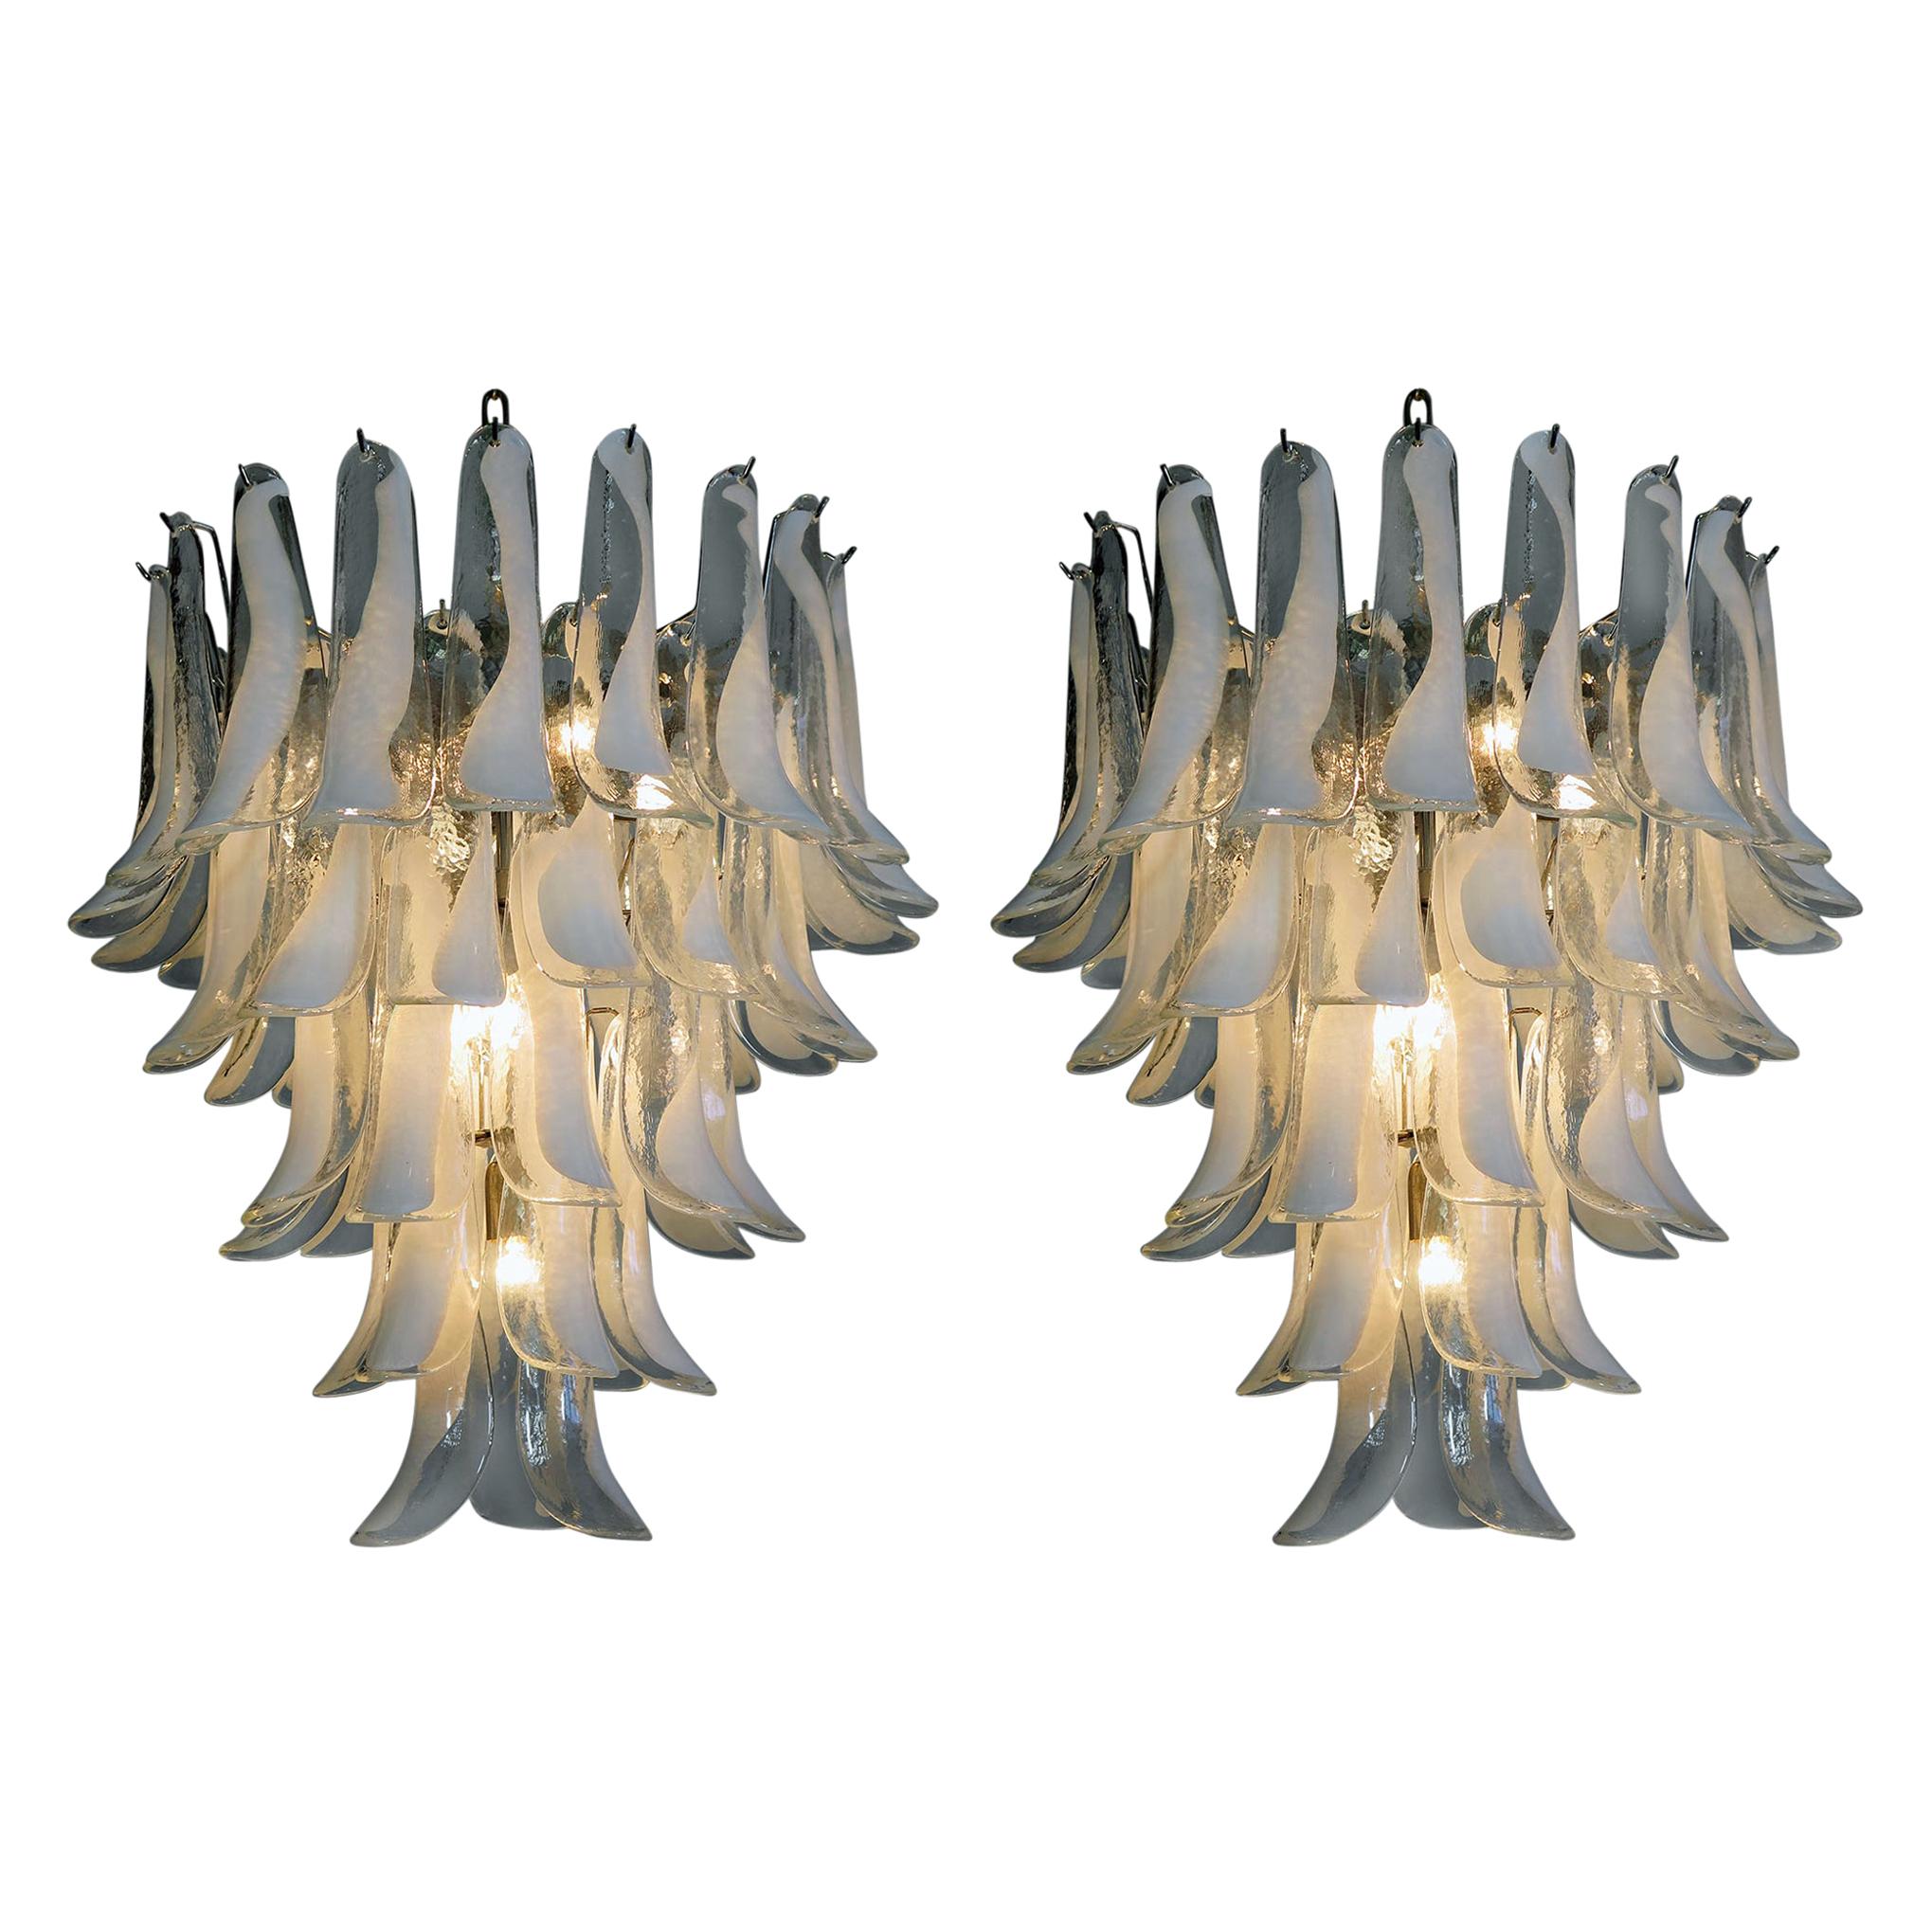 Pair of Huge Italian Vintage Murano Chandelier Made by 52 Glass Petals, 1970s